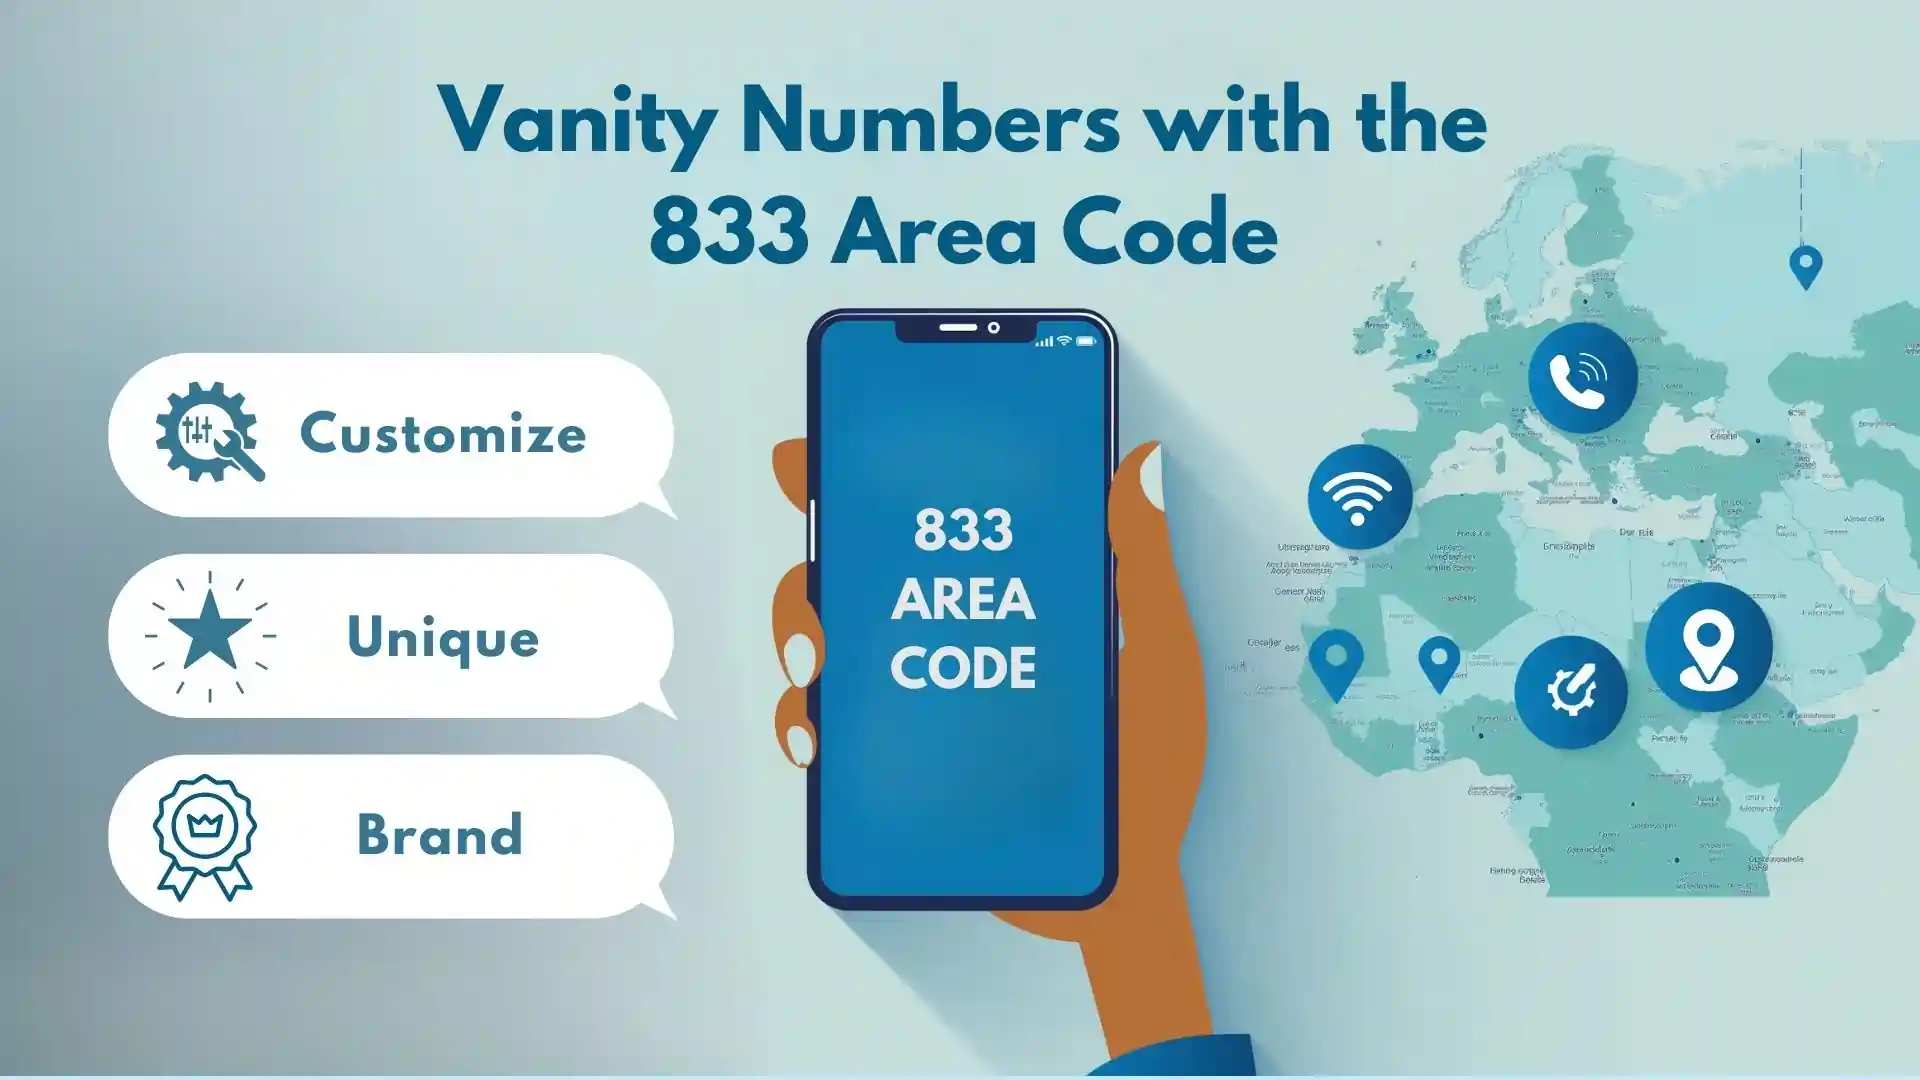 Vanity Numbers with the 833 Area Code